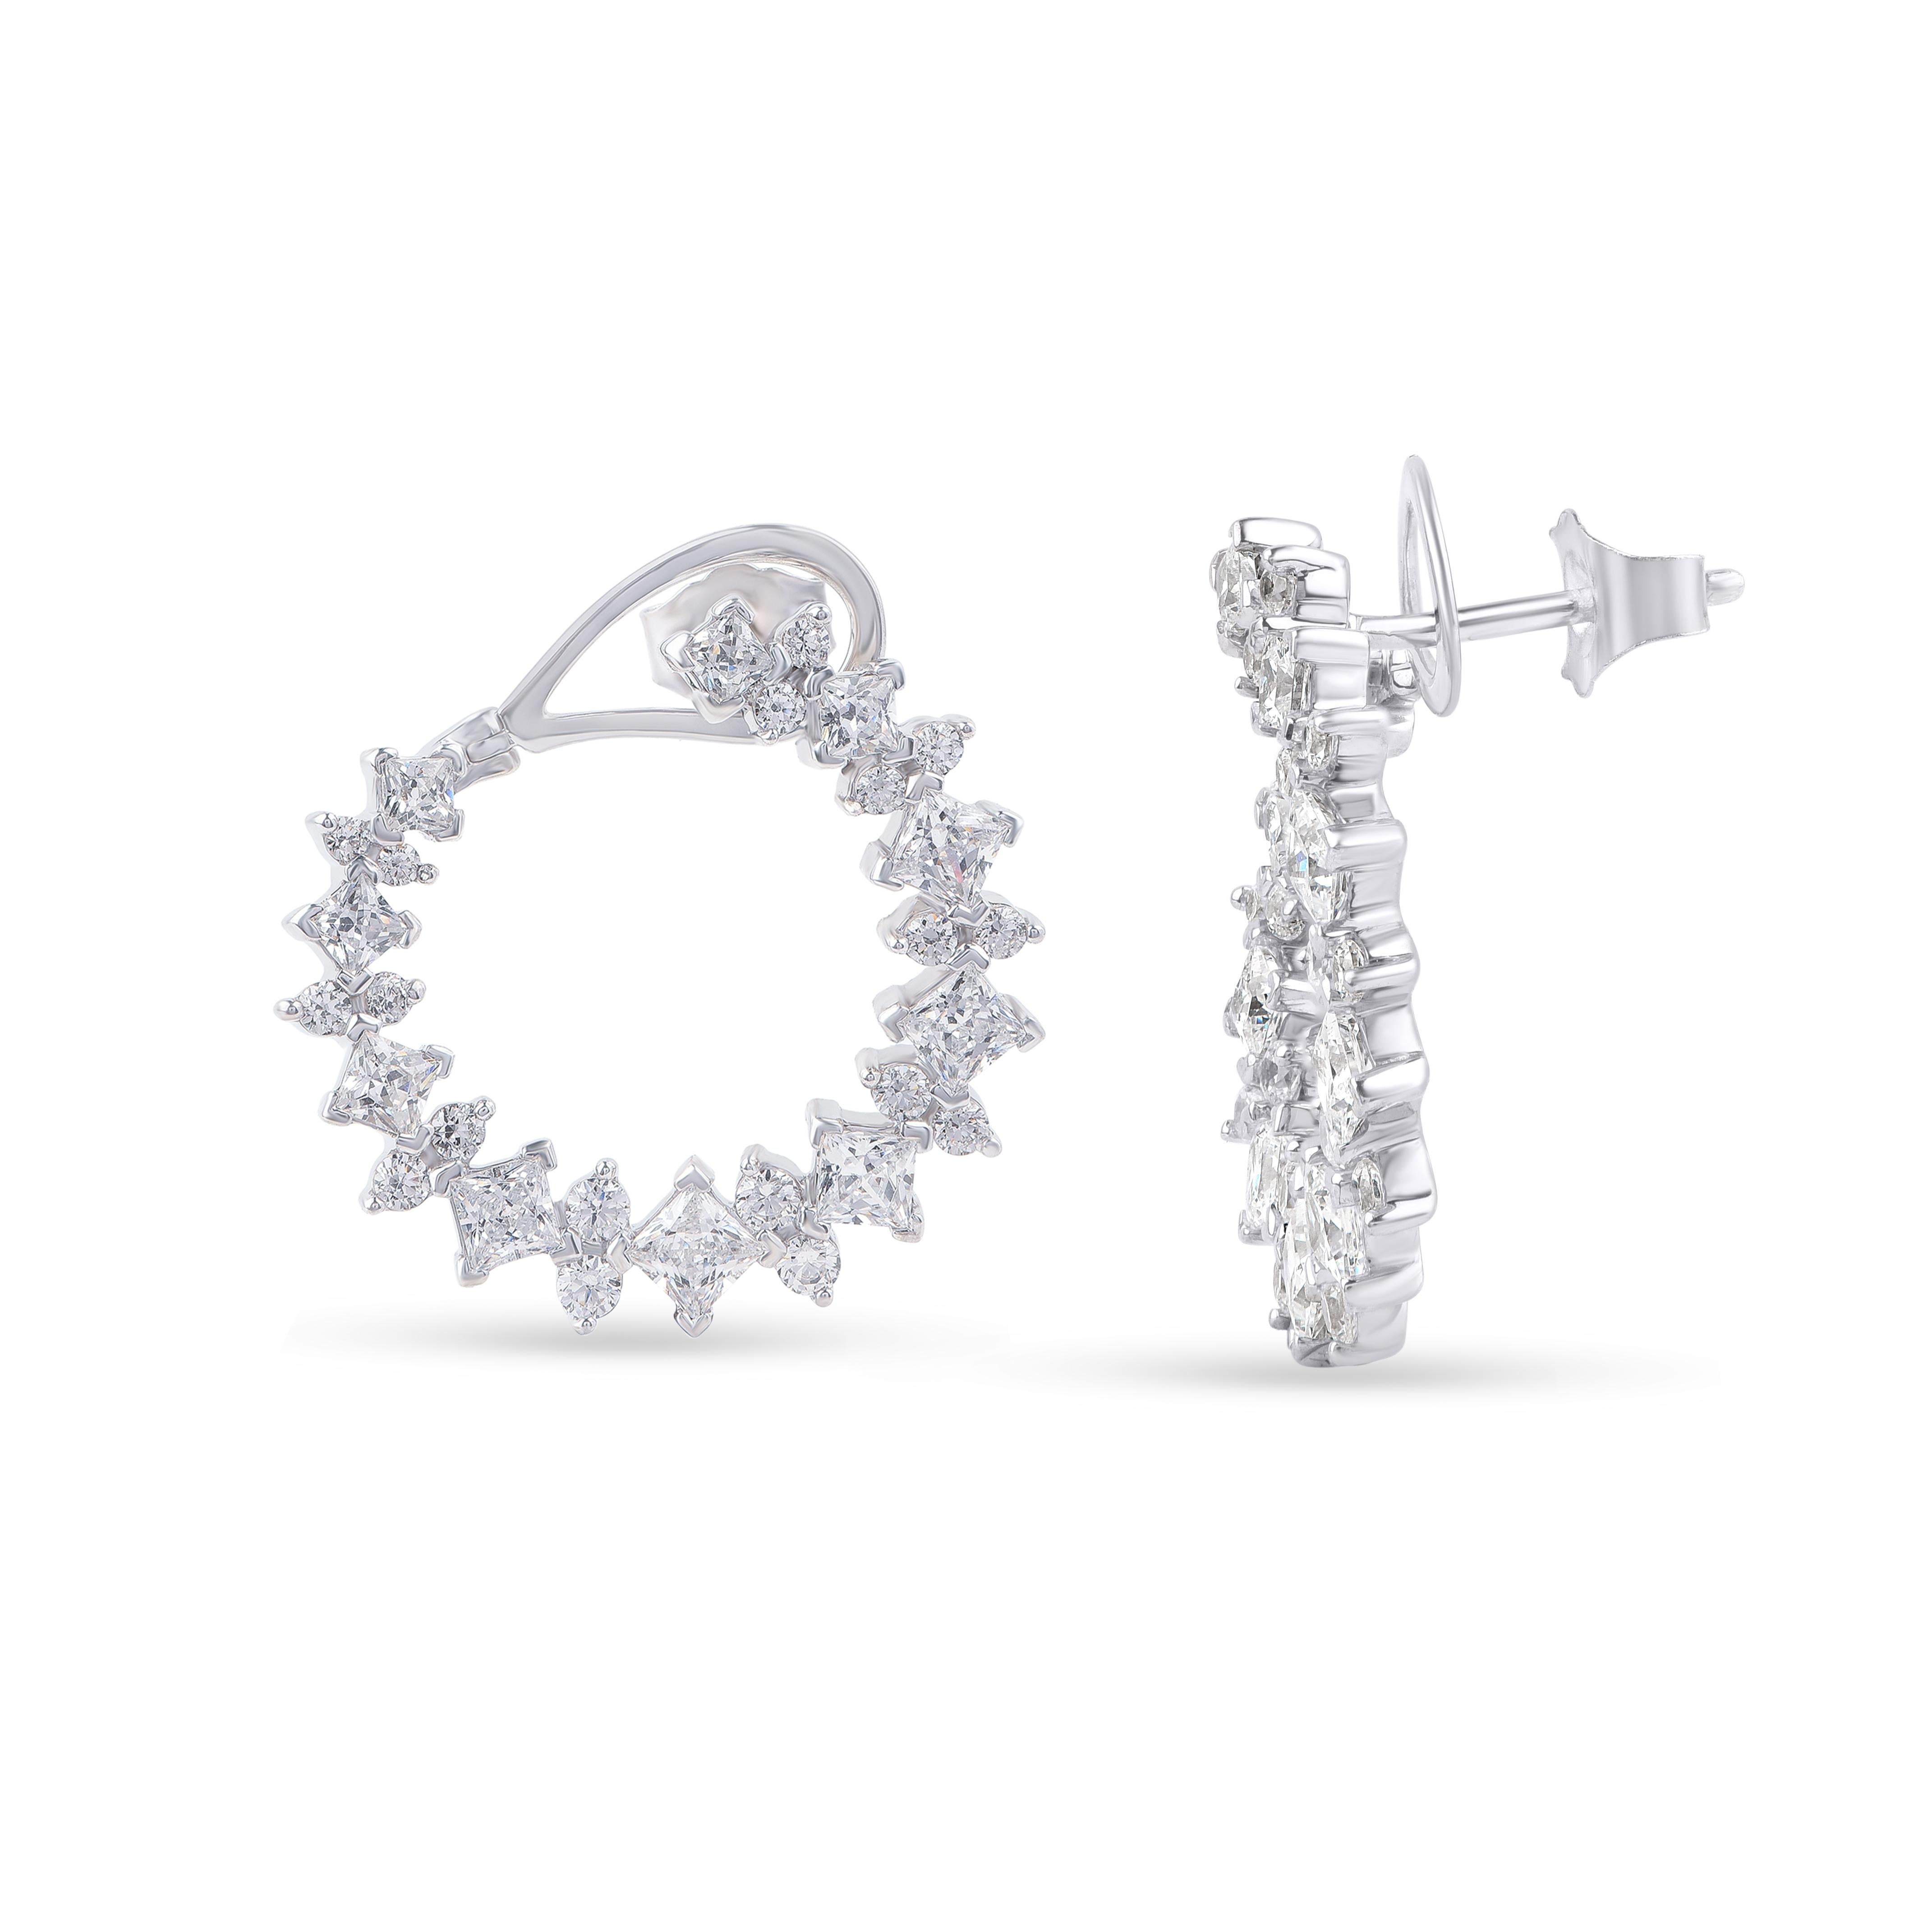 Designed by skillful craftsmen in 18-karat white gold, these diamond hoop earrings feature 36 brilliant cut and 20 princess-cut diamonds in prong setting. The diamonds are graded H-I Color, I2 Clarity. 

We can customize these earrings in yellow and